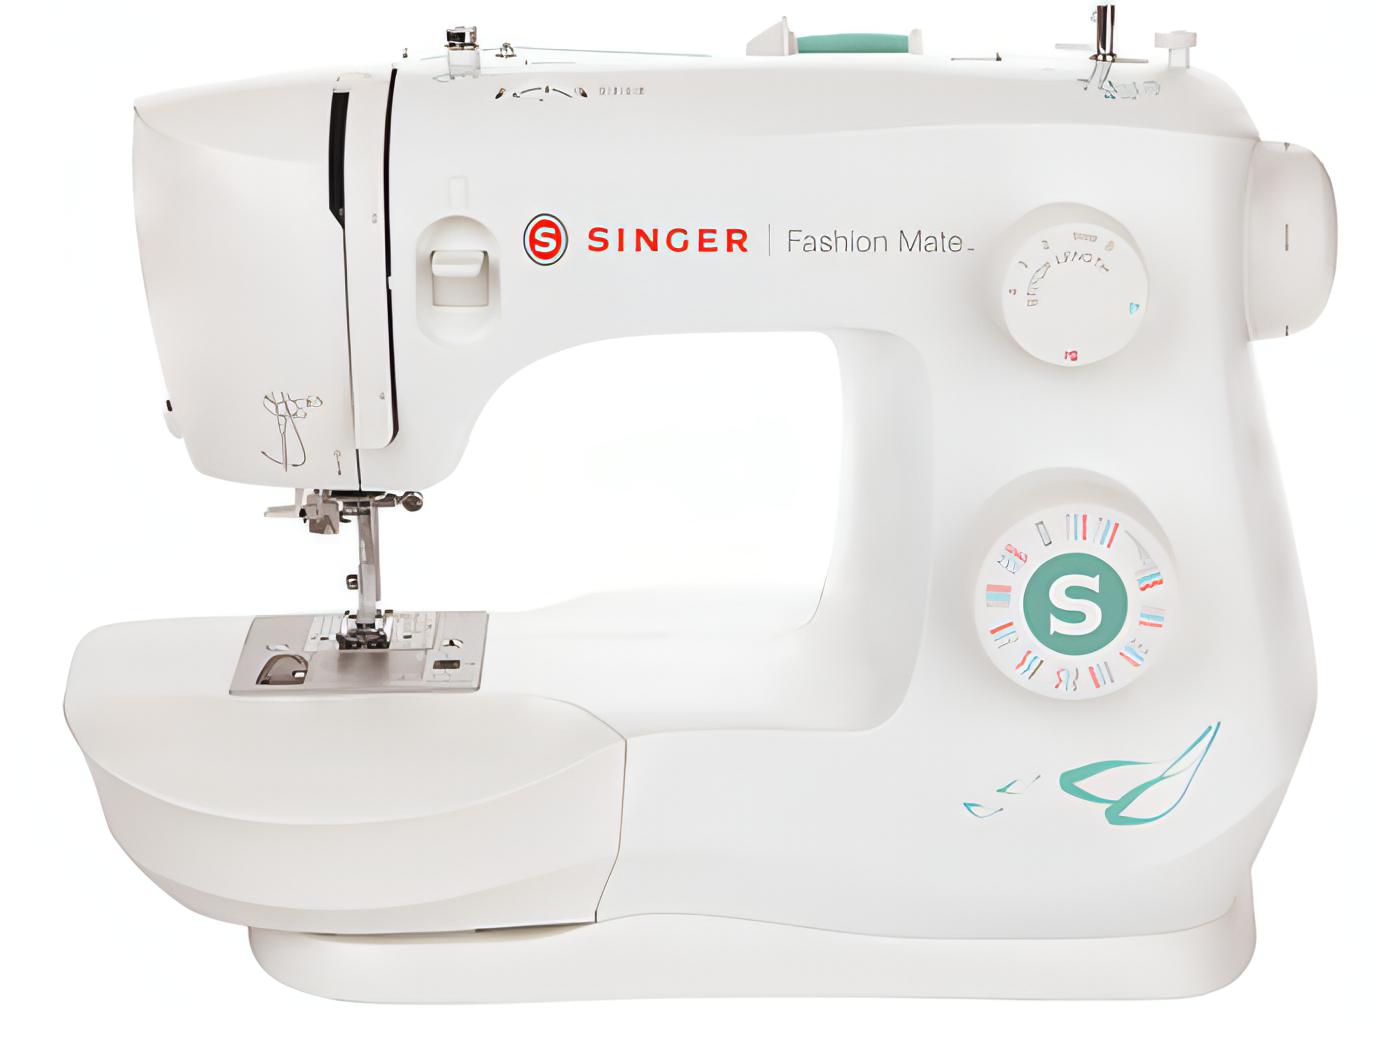 Singer Fashion Mate 3337 Sewing Machine with Drop-in Bobbin and One Step Buttonhole